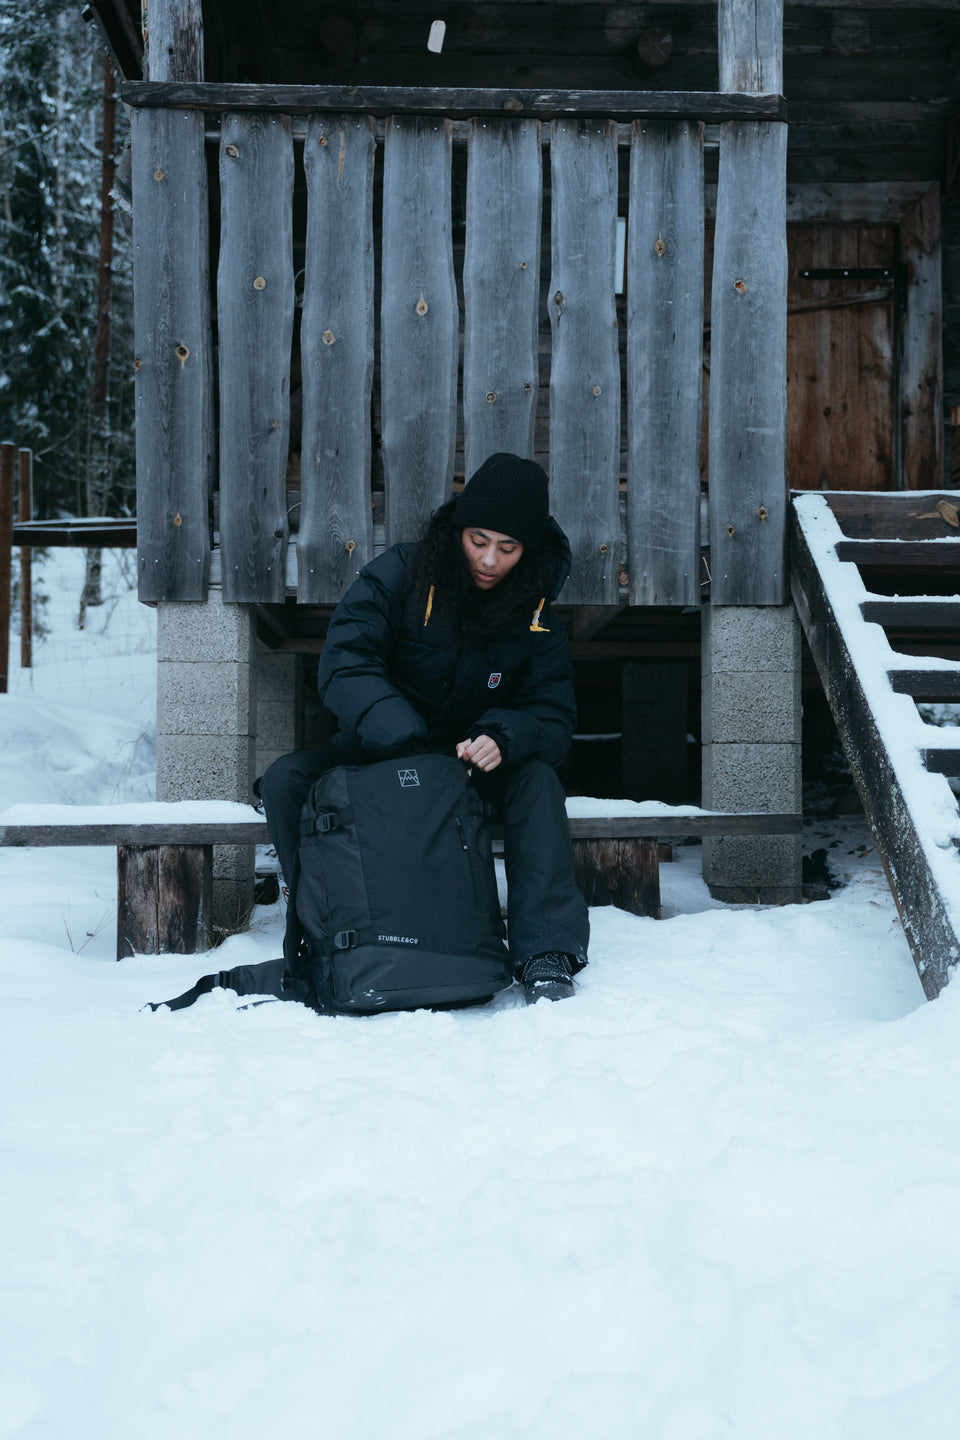 A woman sitting in front of a cabin in the snow packing her black backpack